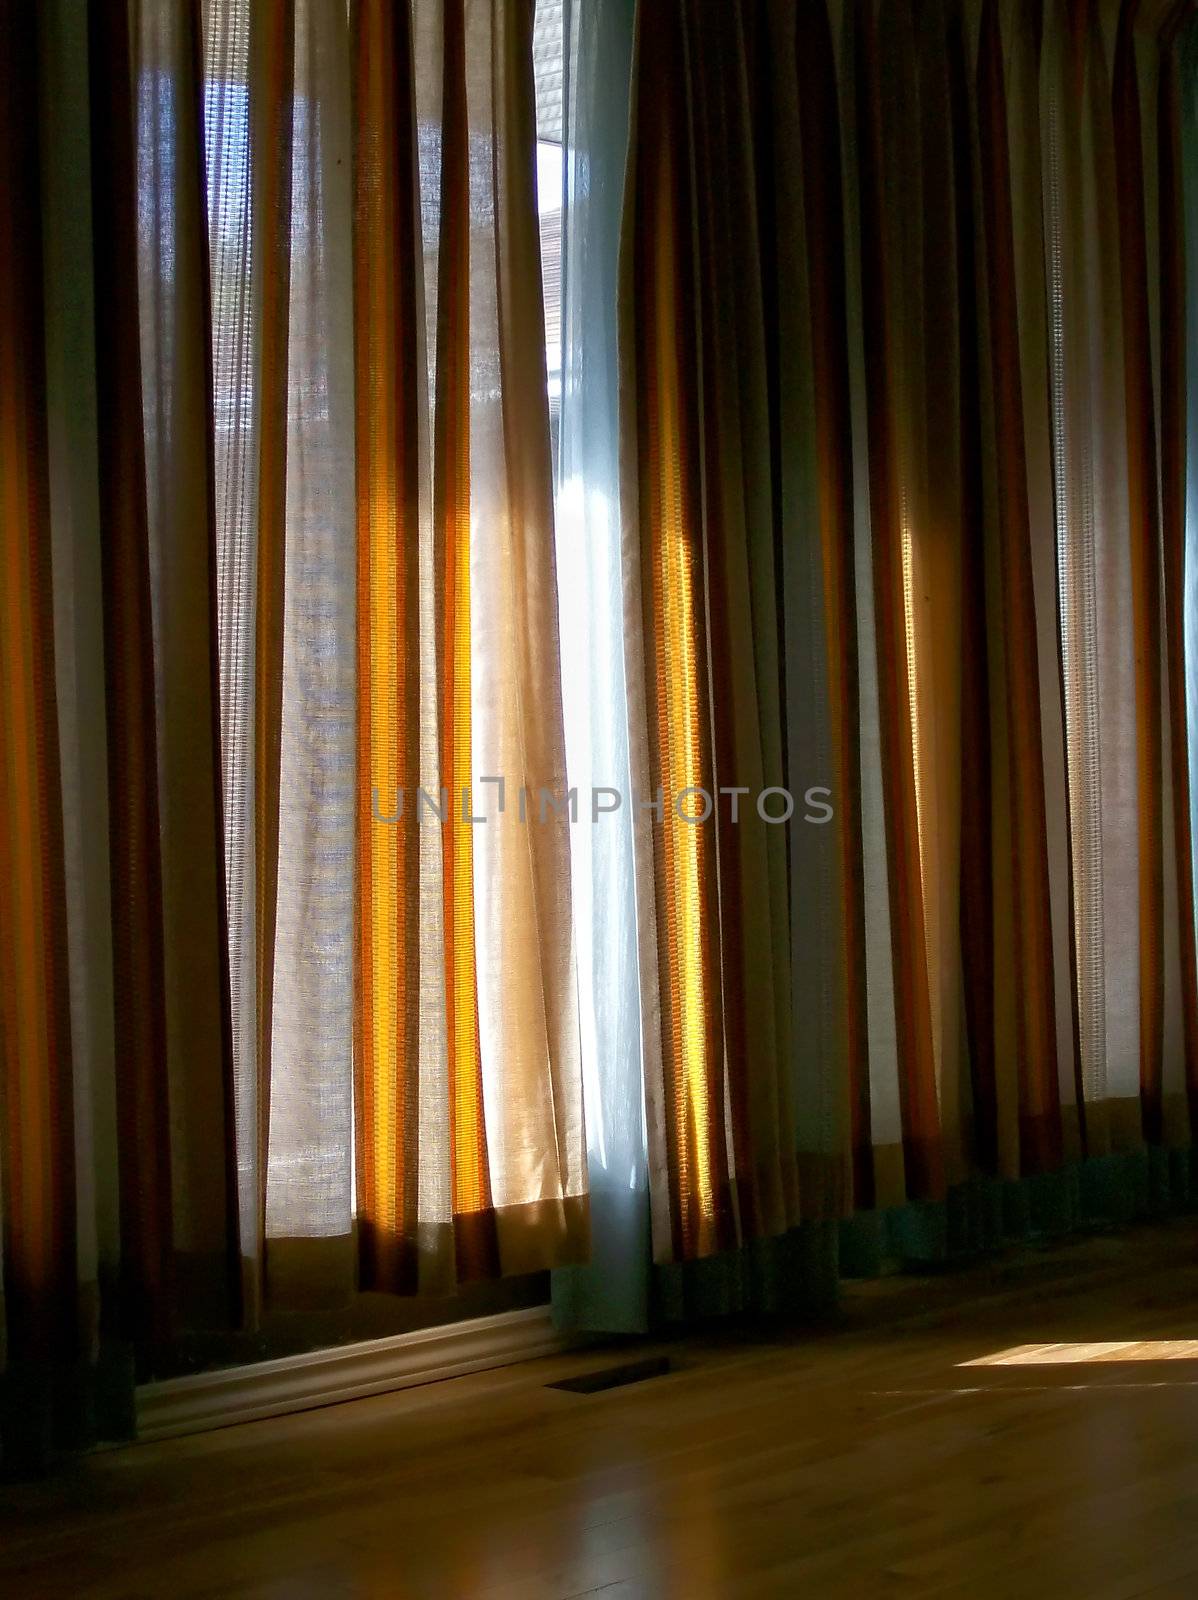 Curtains Filtered Light Vertical by watamyr